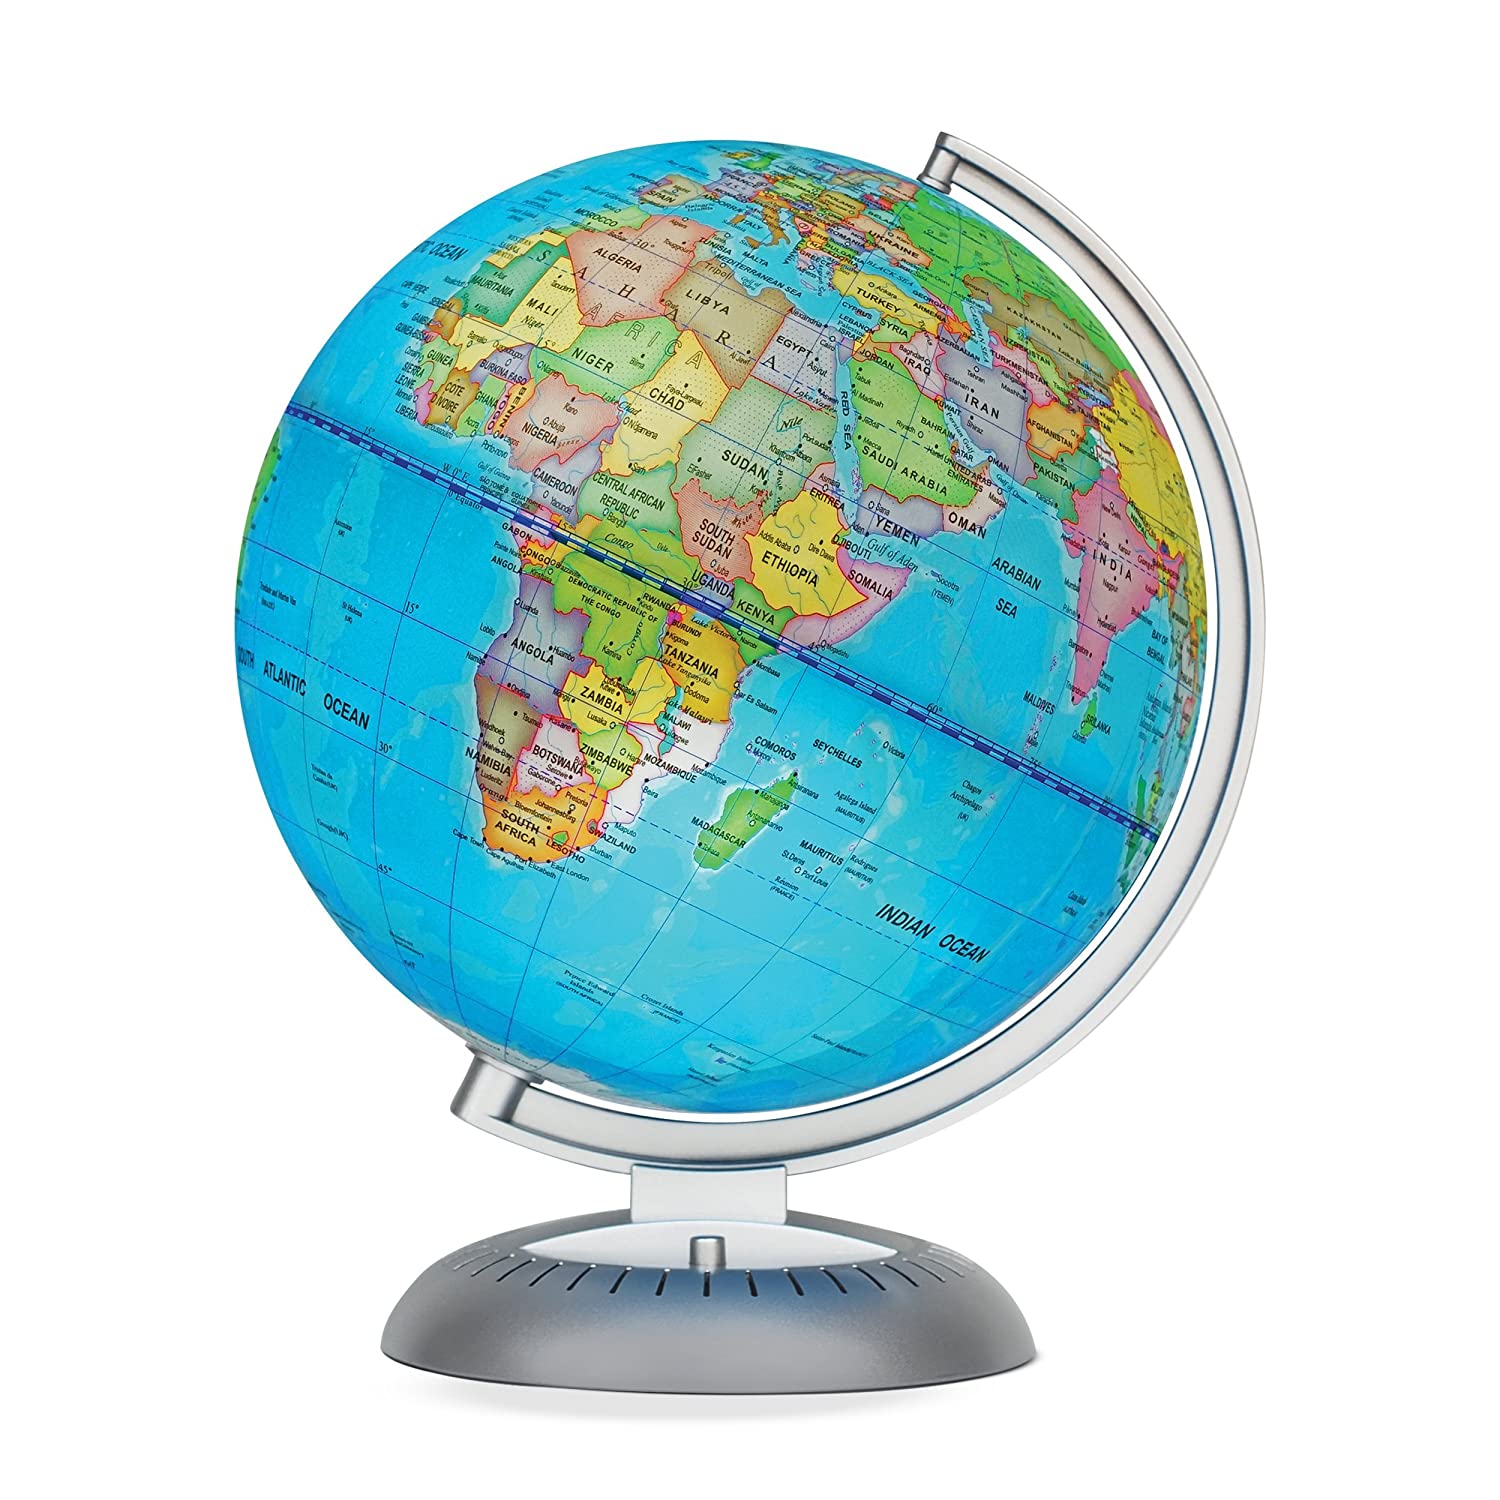 Illuminated World Globe for Kids With Stand,Built in LED for Illuminated Night View (Renewed)